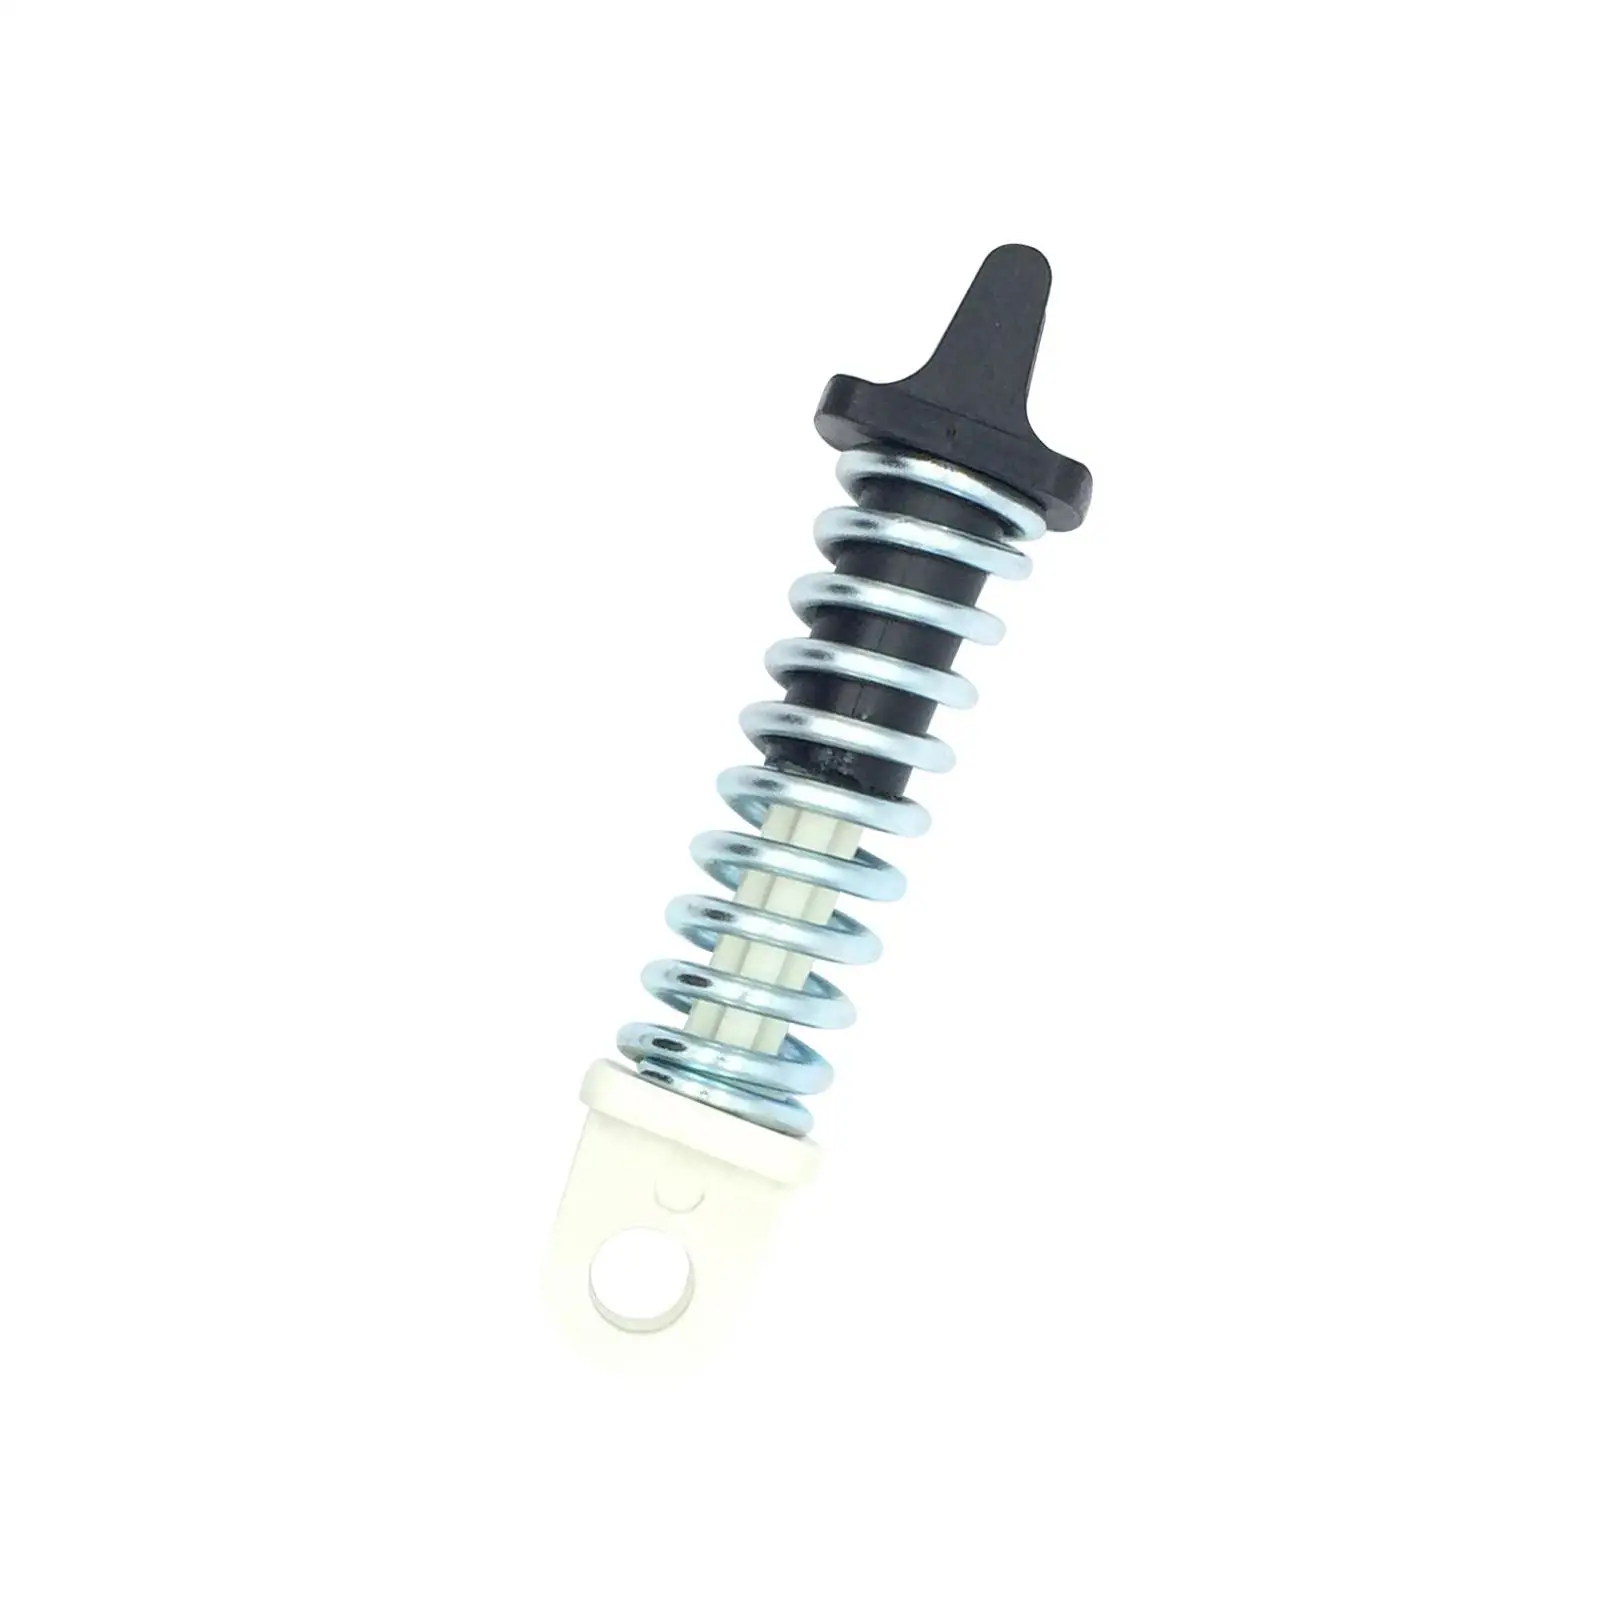 Clutch Pedal Assist Spring Replace 77 01 208 109 for Renault Trafic MK2